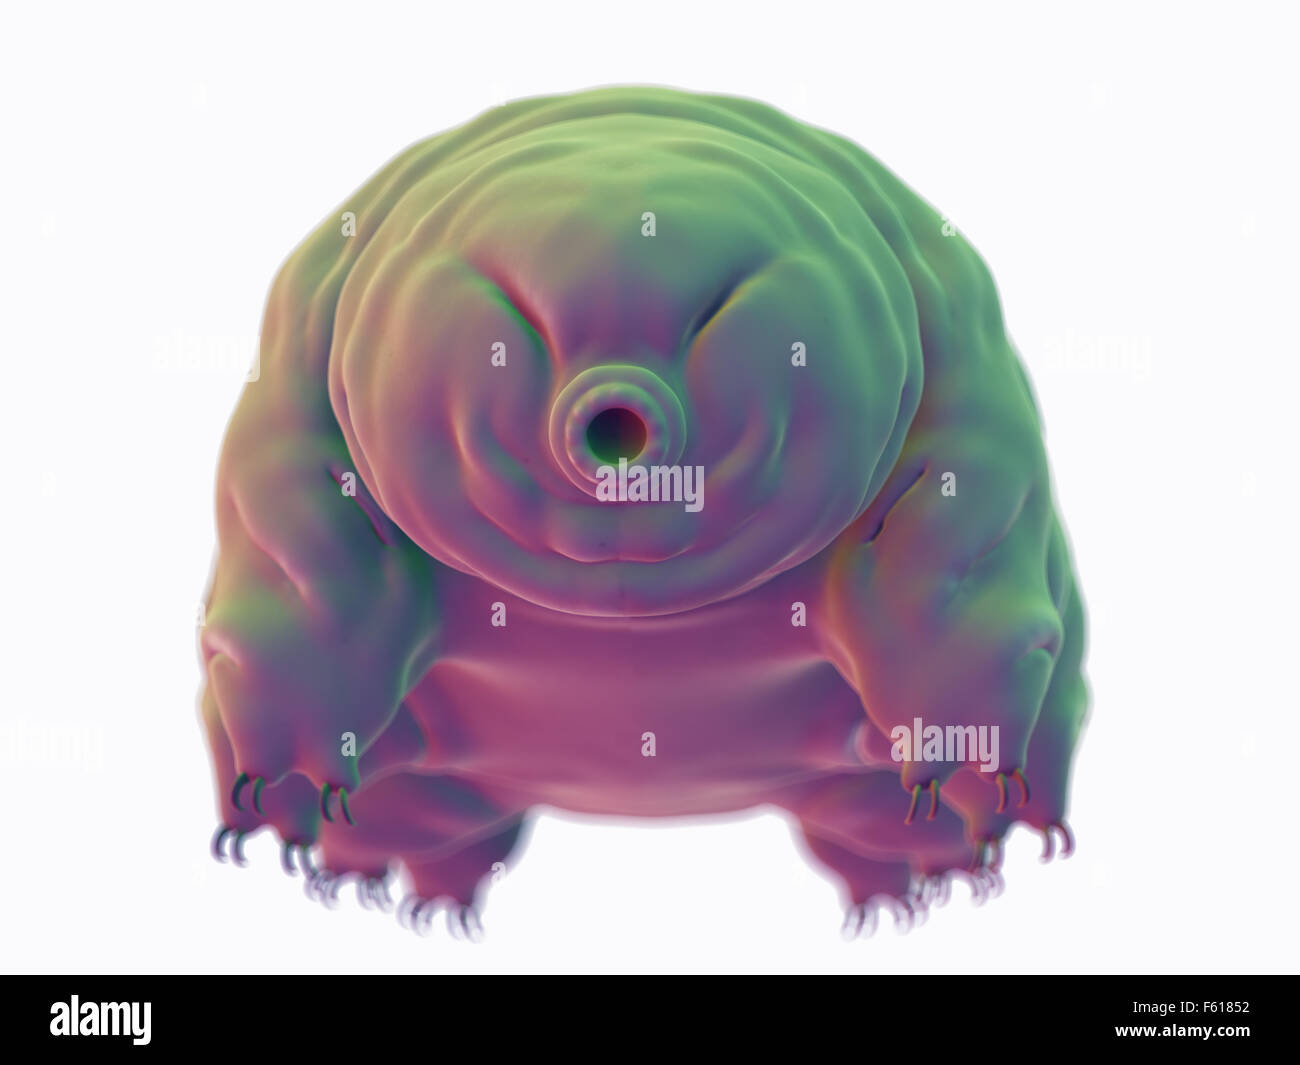 medically accurate illustration of a water bear Stock Photo